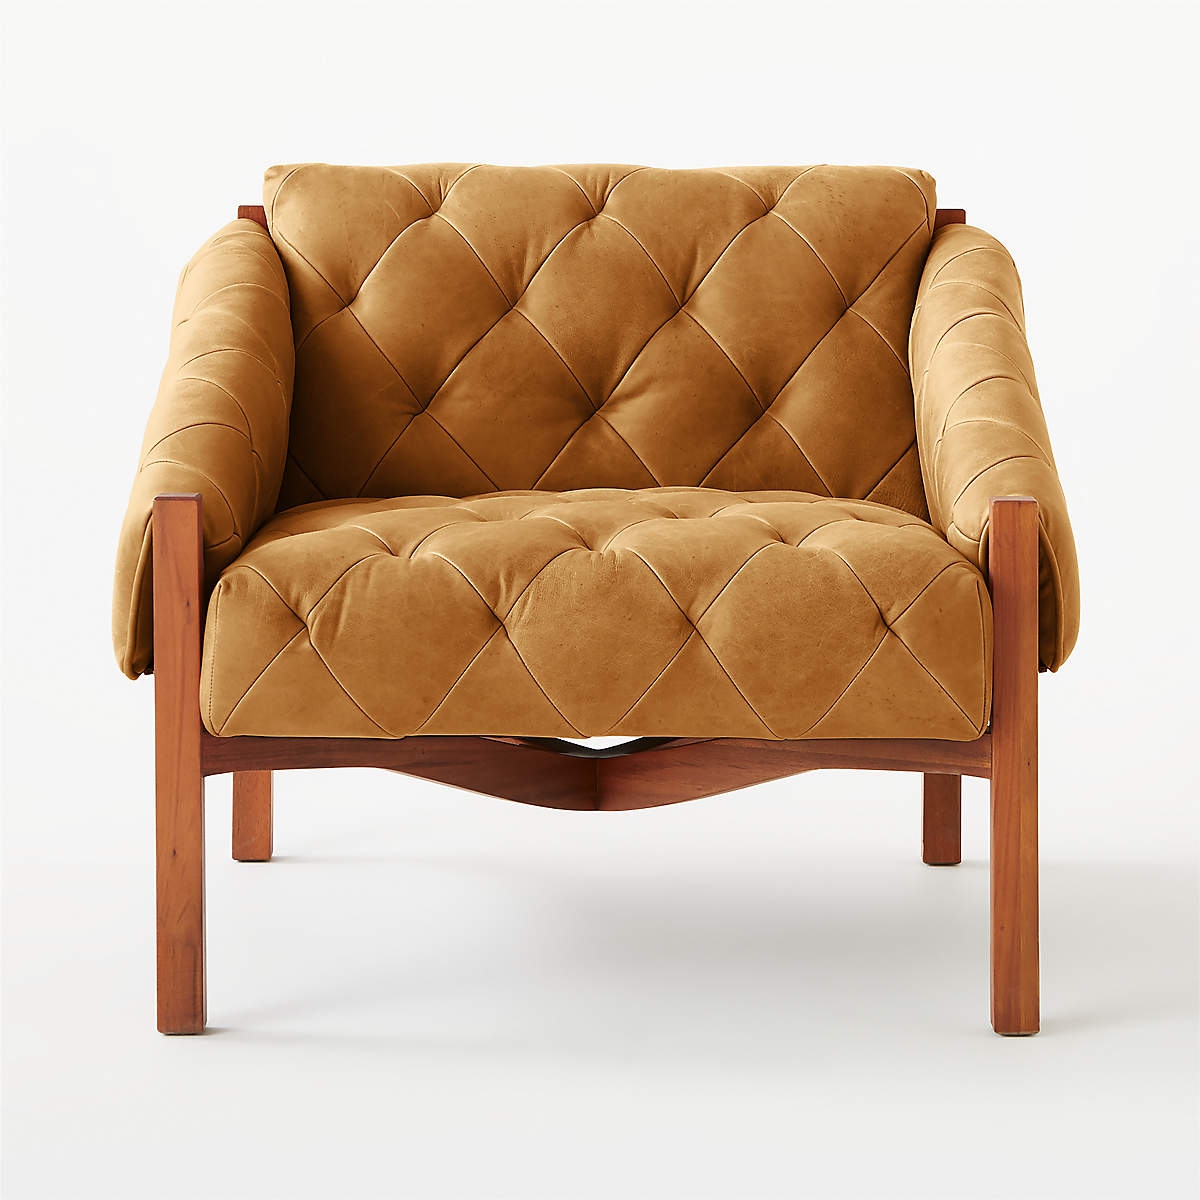 Abruzzo Brown Leather Tufted Chair - Image 0